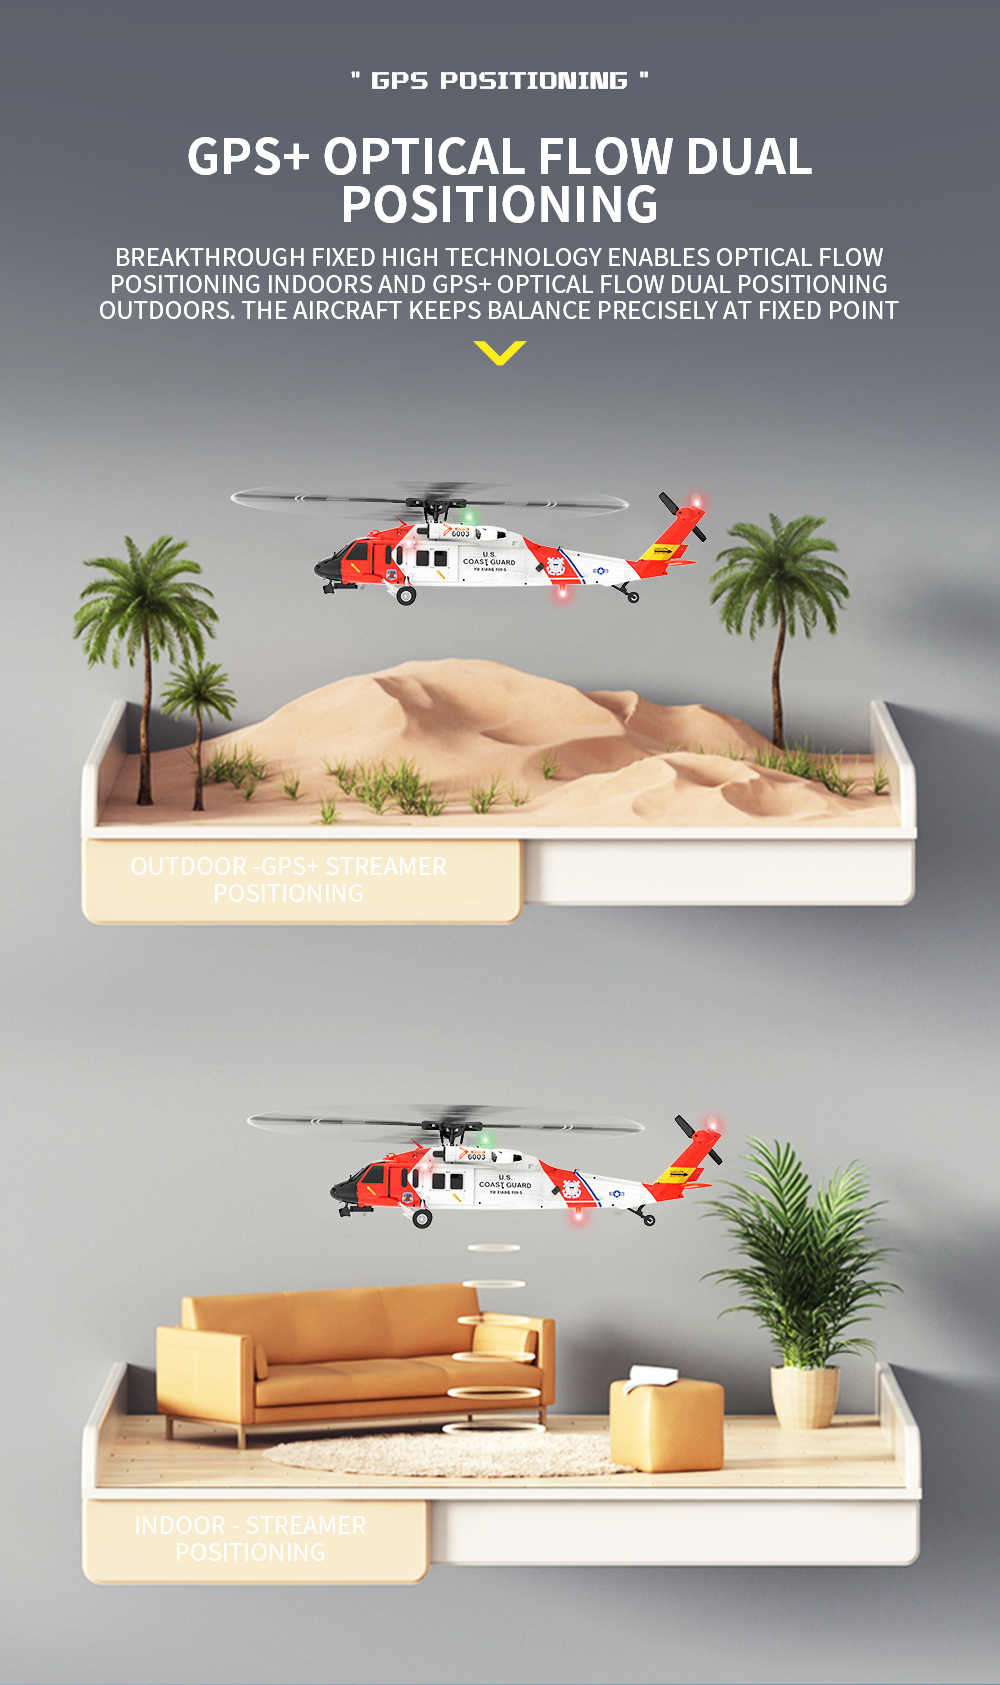 Remote Control Sikorsky HH-60 / MH-60T Jayhawk United States Coast Guard Interdiction Helicopter, HH-60J / MH-60 Jayhawk RC Helicopter Toy, RC Military Helicopter Toy. Coast Guard Aircraft Model